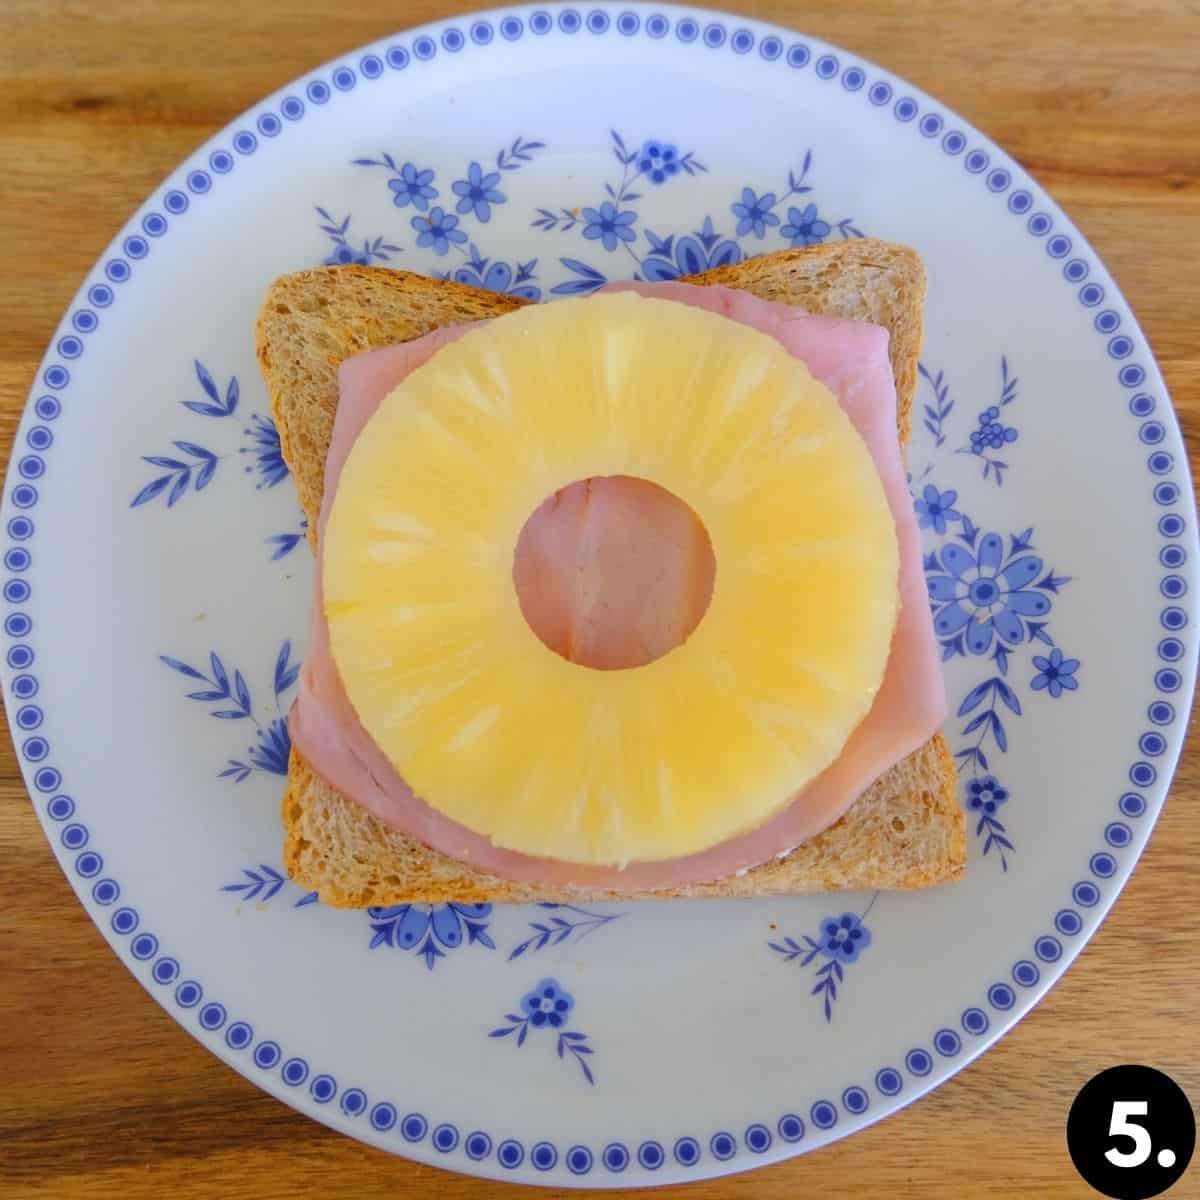 Toast with pinapple and ham.